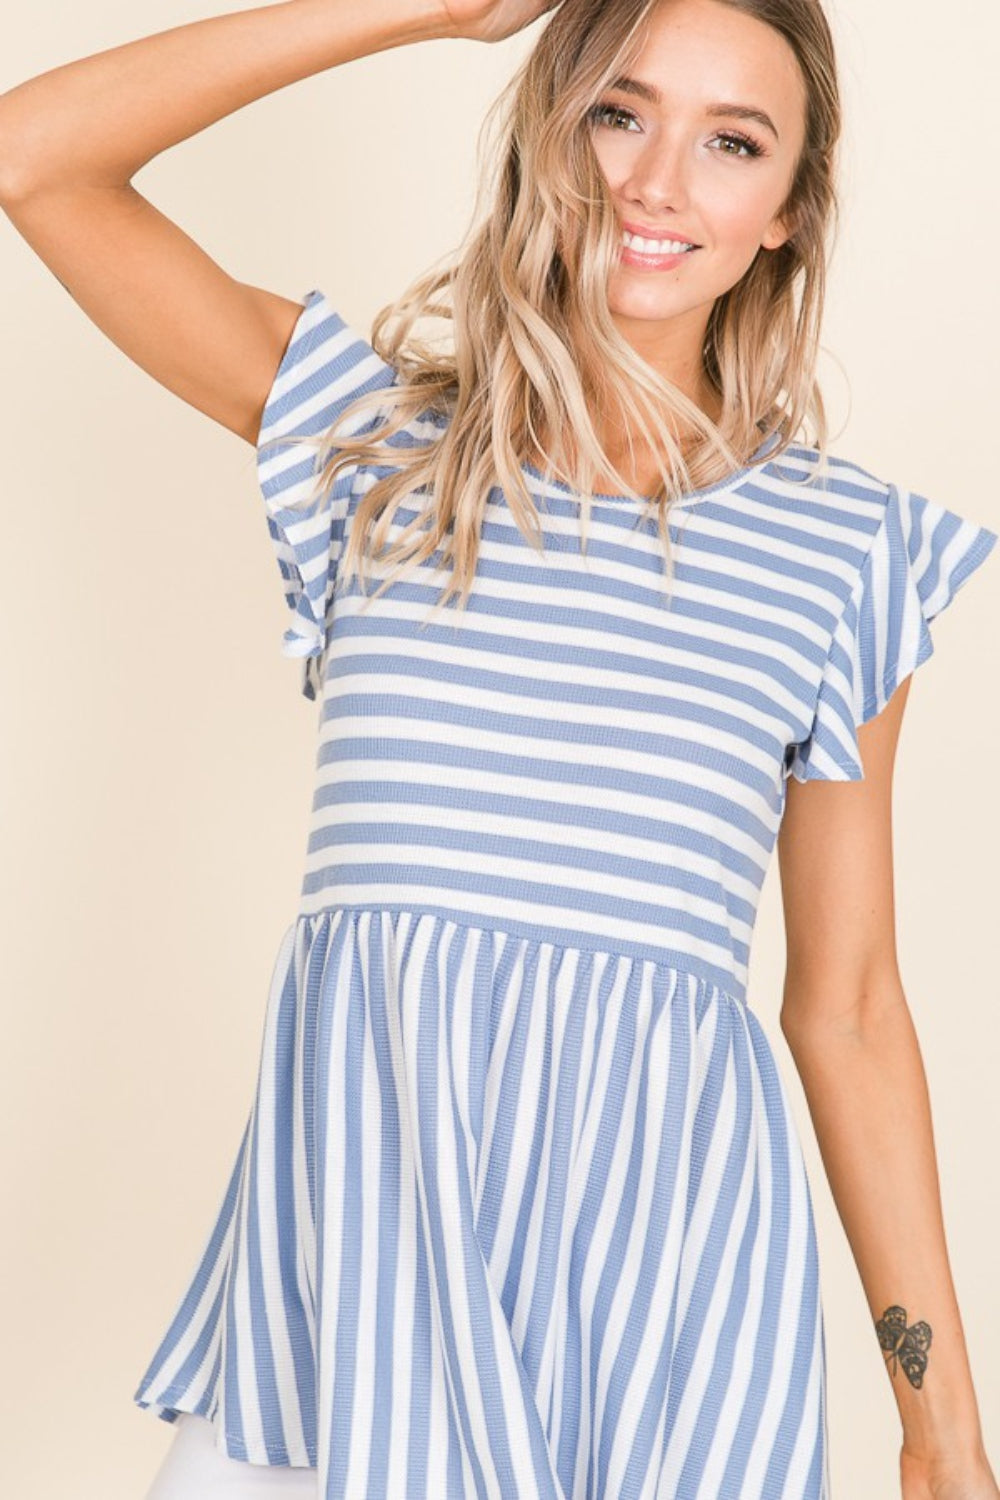 Classic Striped Blouse - Work to Weekend Style